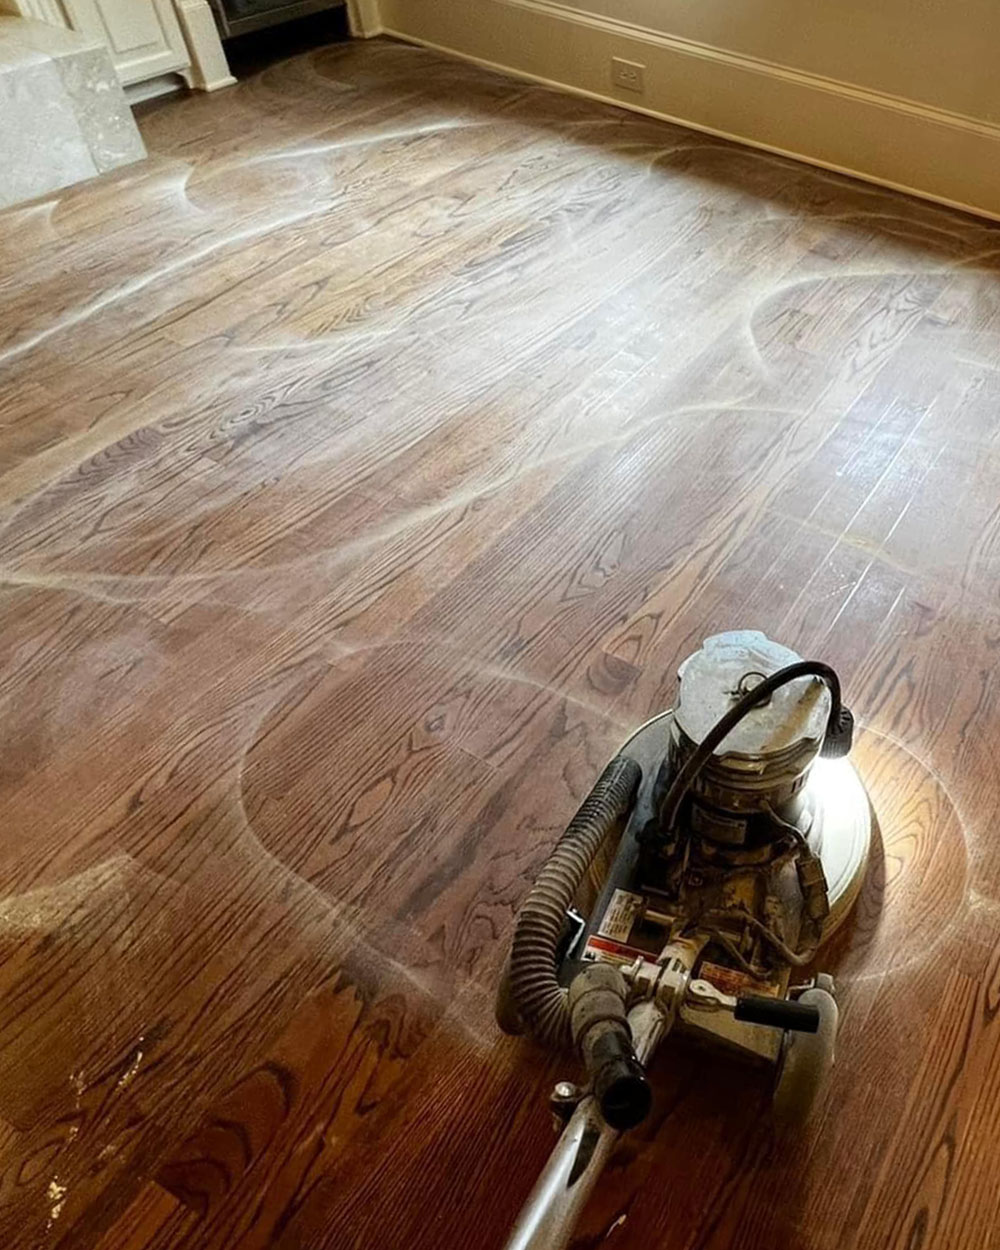 Hardwood Cleaning Process Hardwood Floor Refinishing in St Louis MO, O'fallon IL, and Surrounding Areas